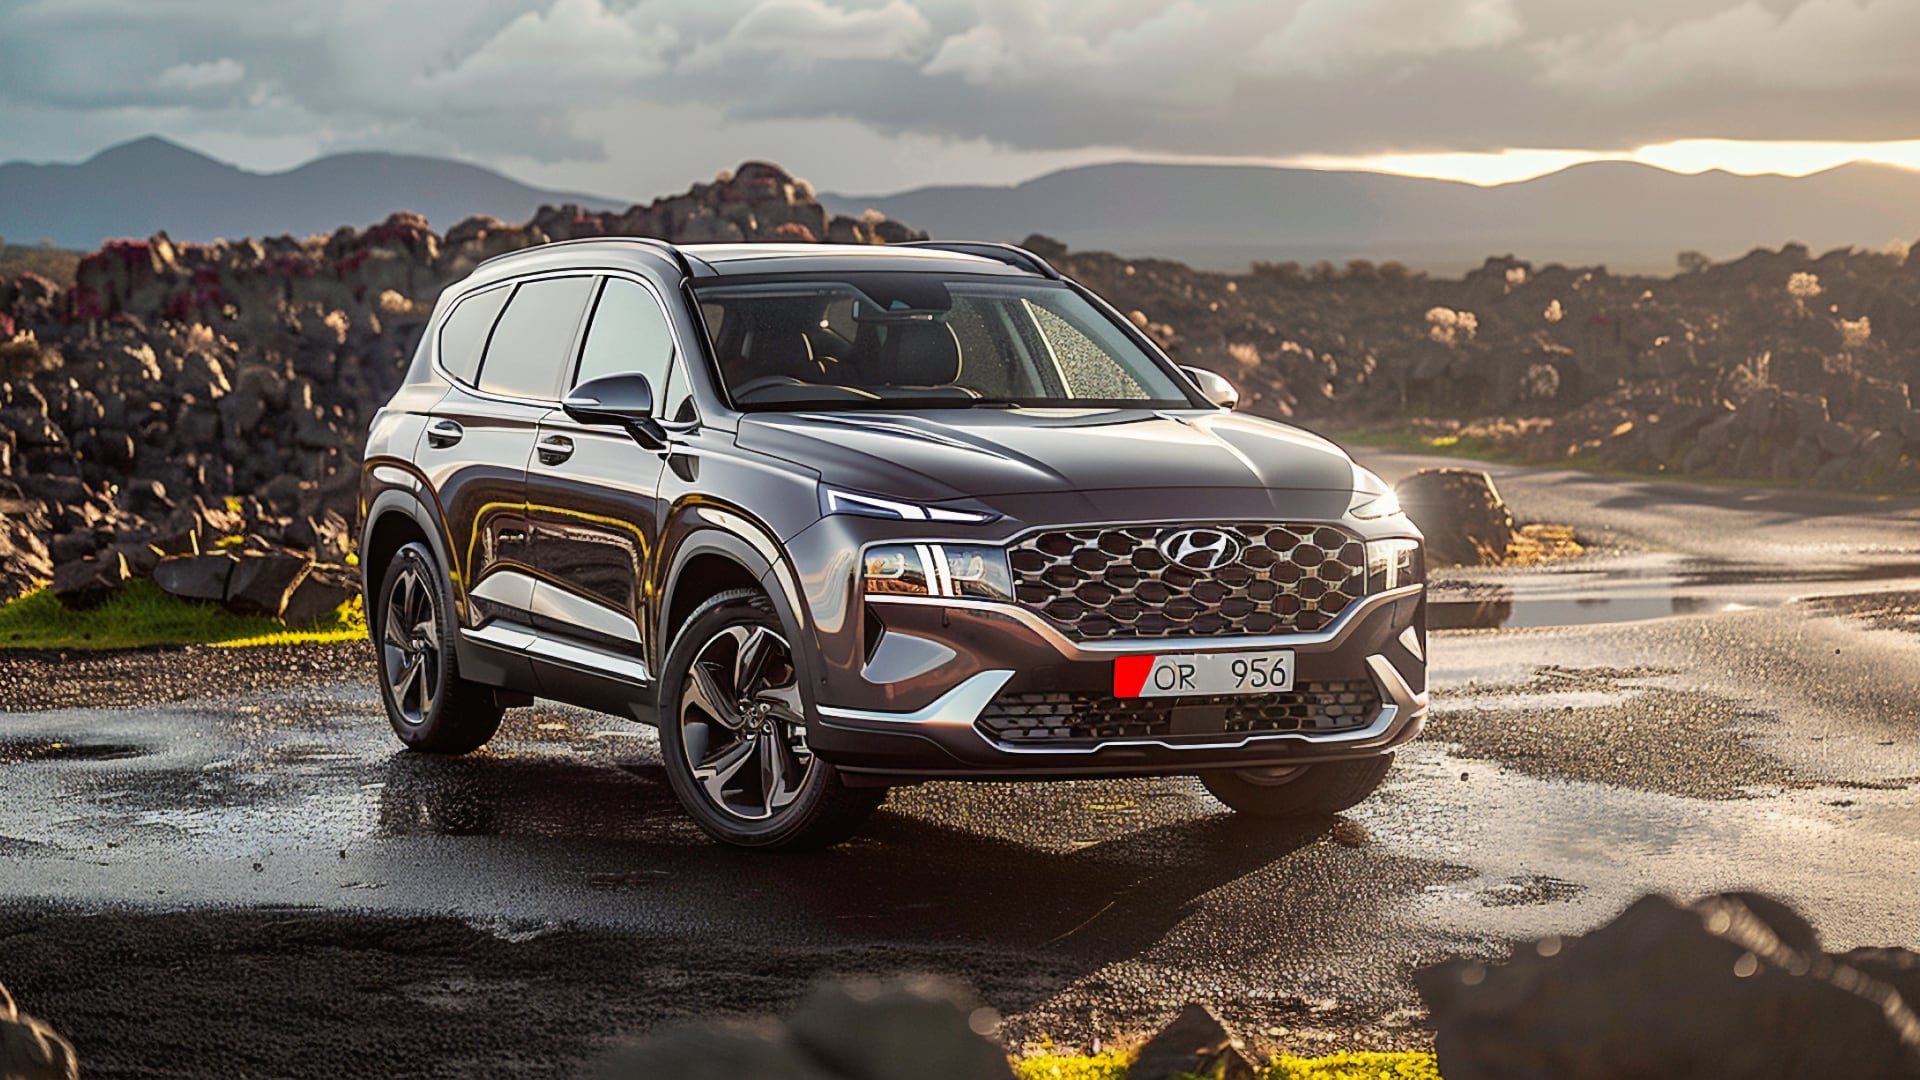 The 2020 Hyundai Santa Fe is parked on a rocky road.